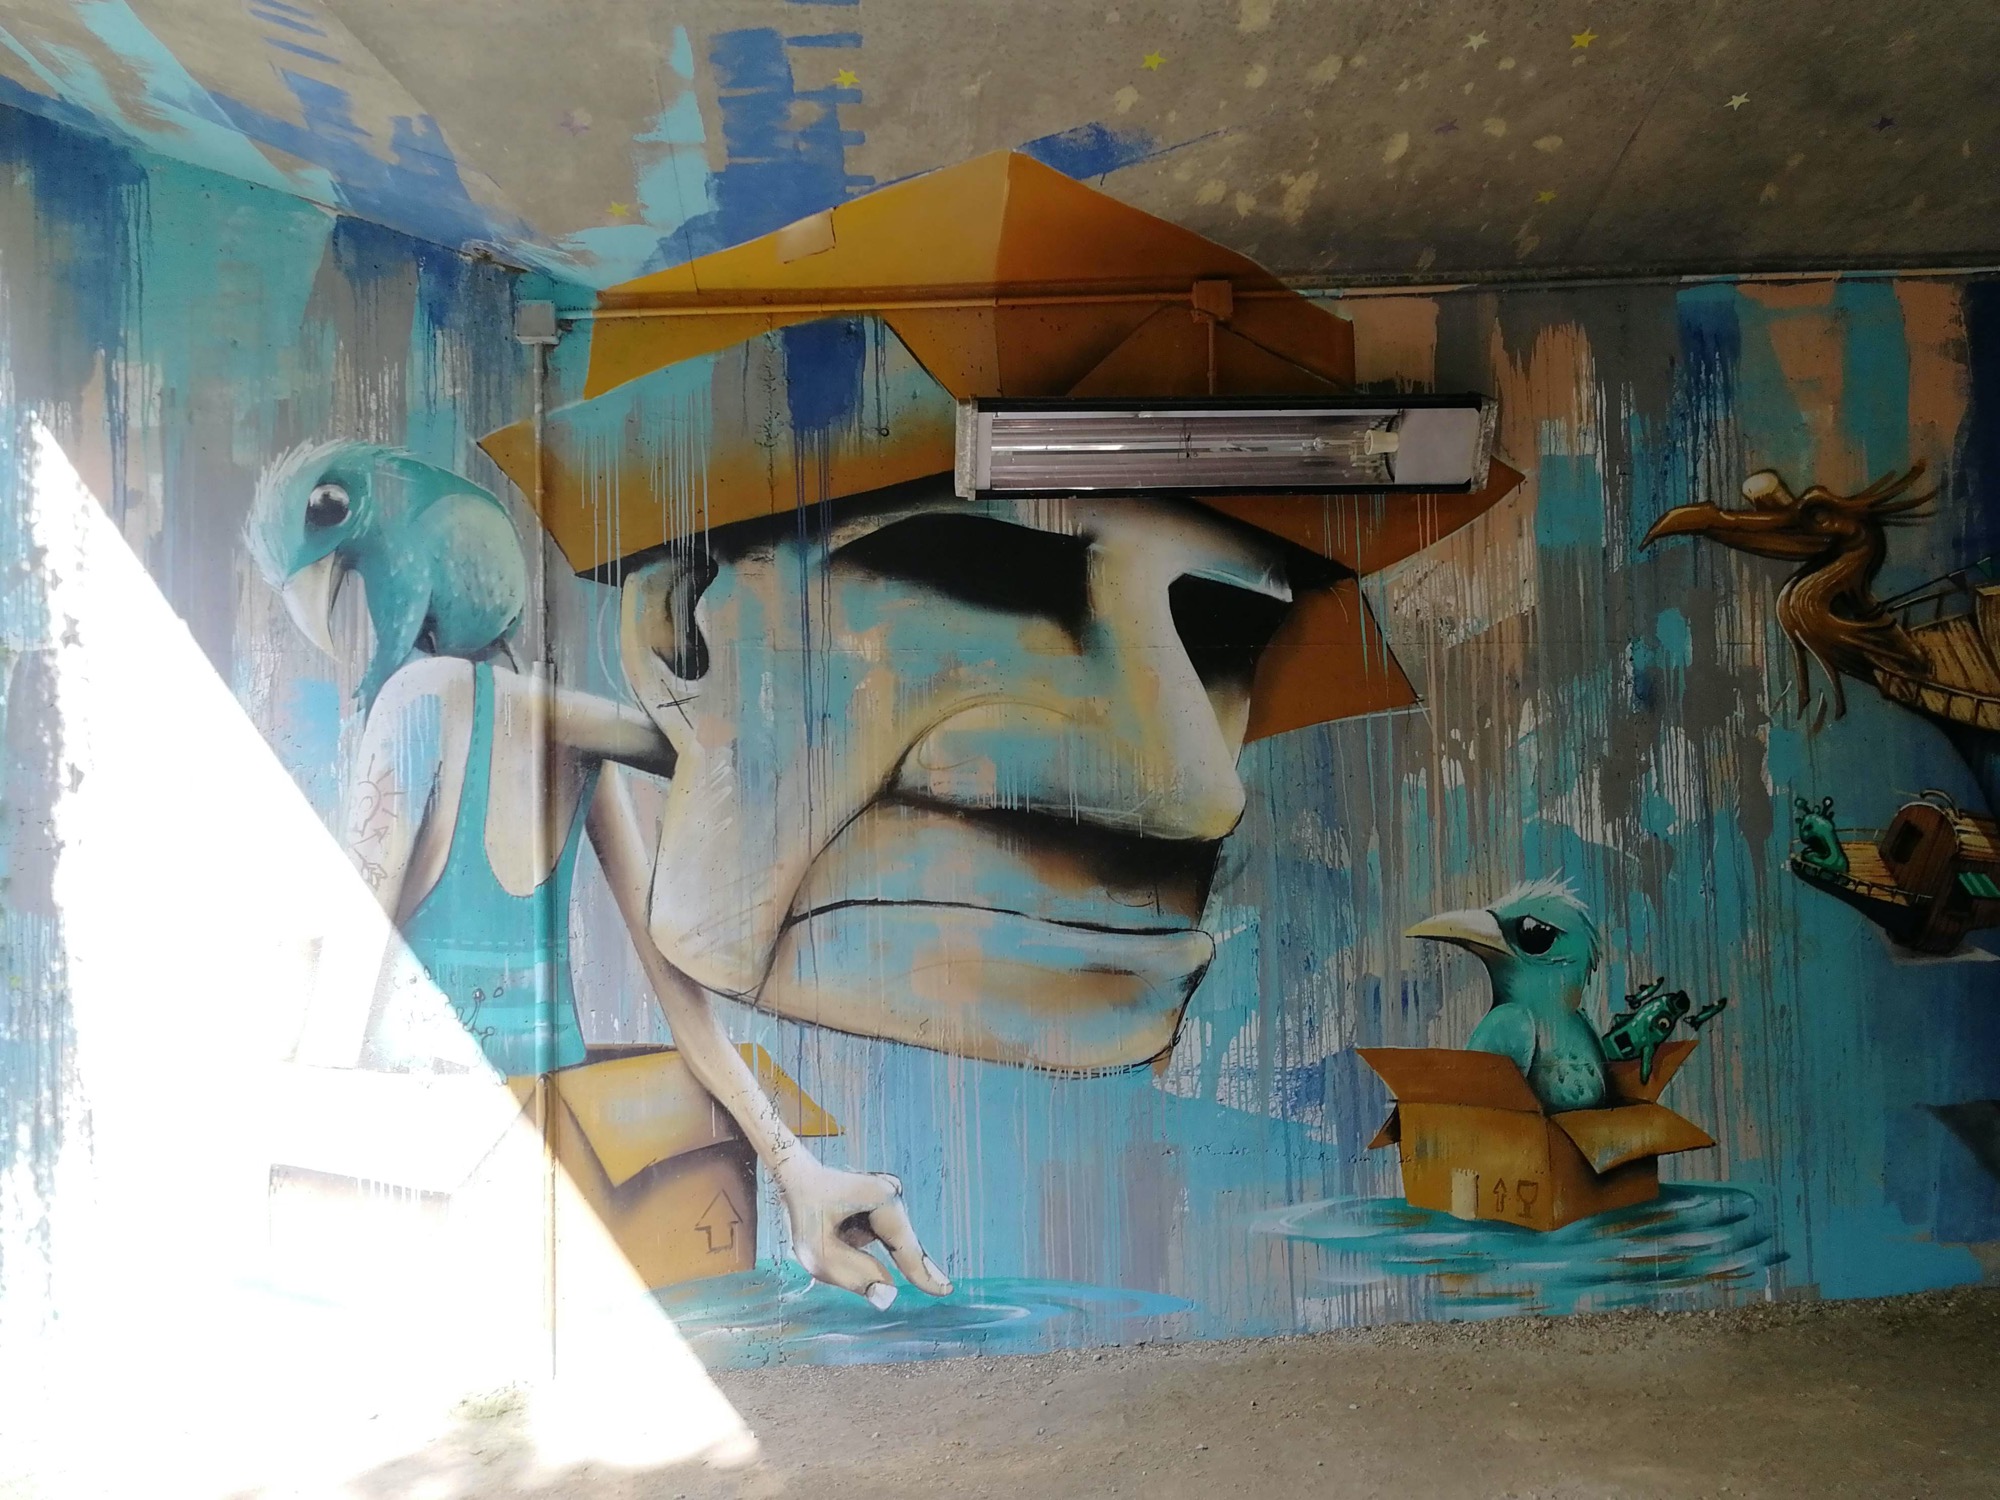 Graffiti 2970  by the artist Mika captured by Rabot in Vannes France